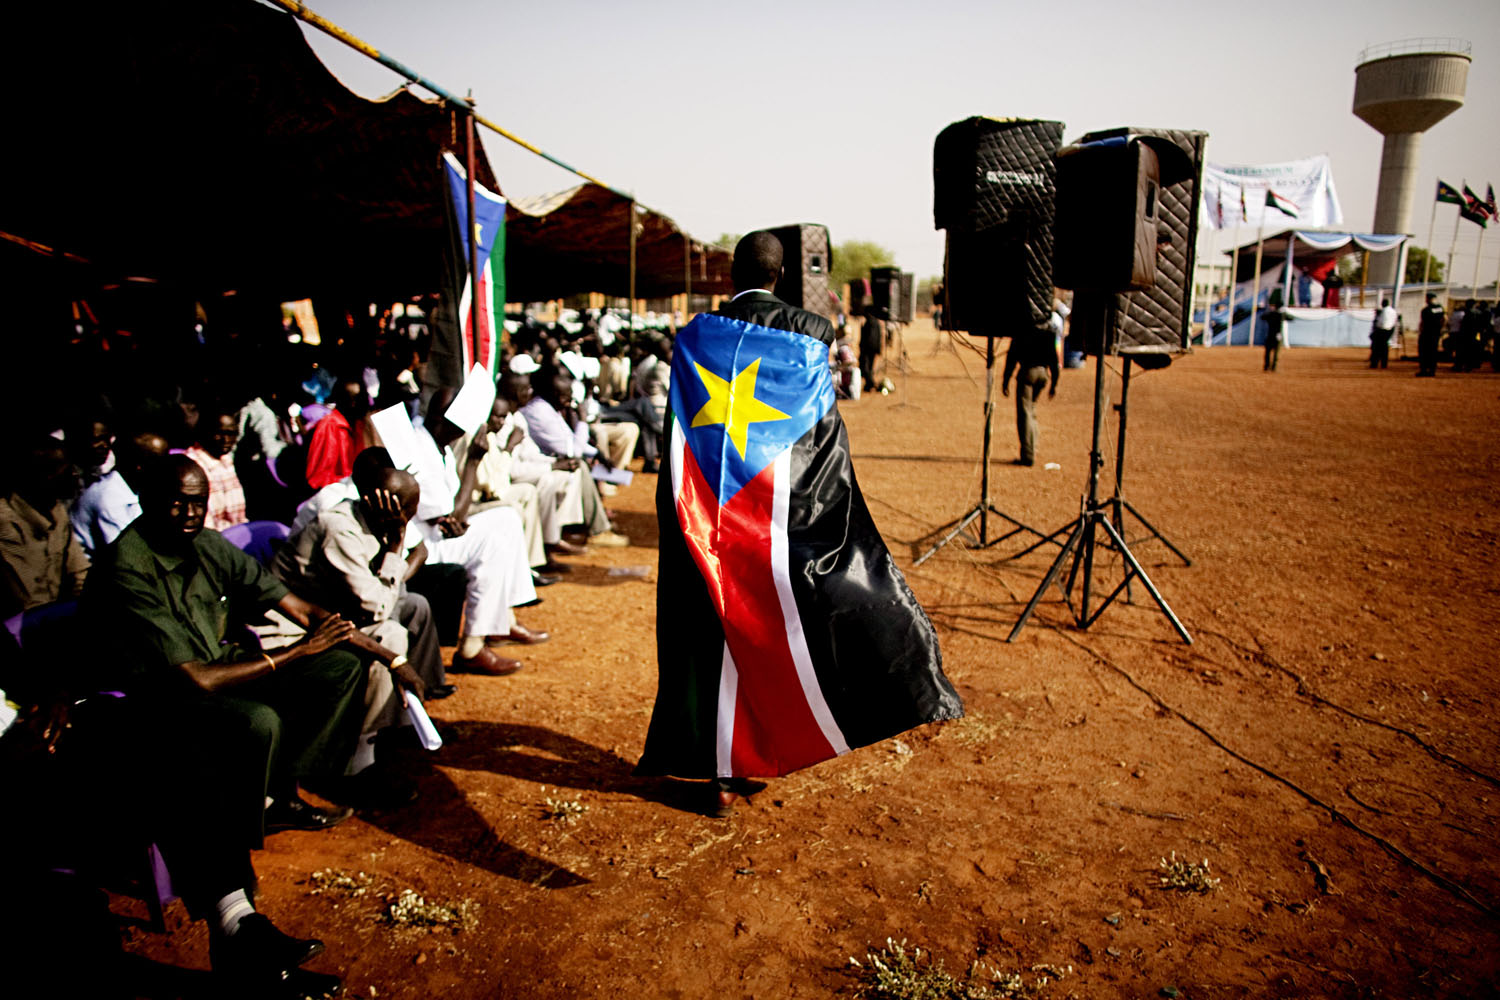 January 30, 2011. A man dons the flag of the Sudan People's Liberation Movement during a rally in Juba.